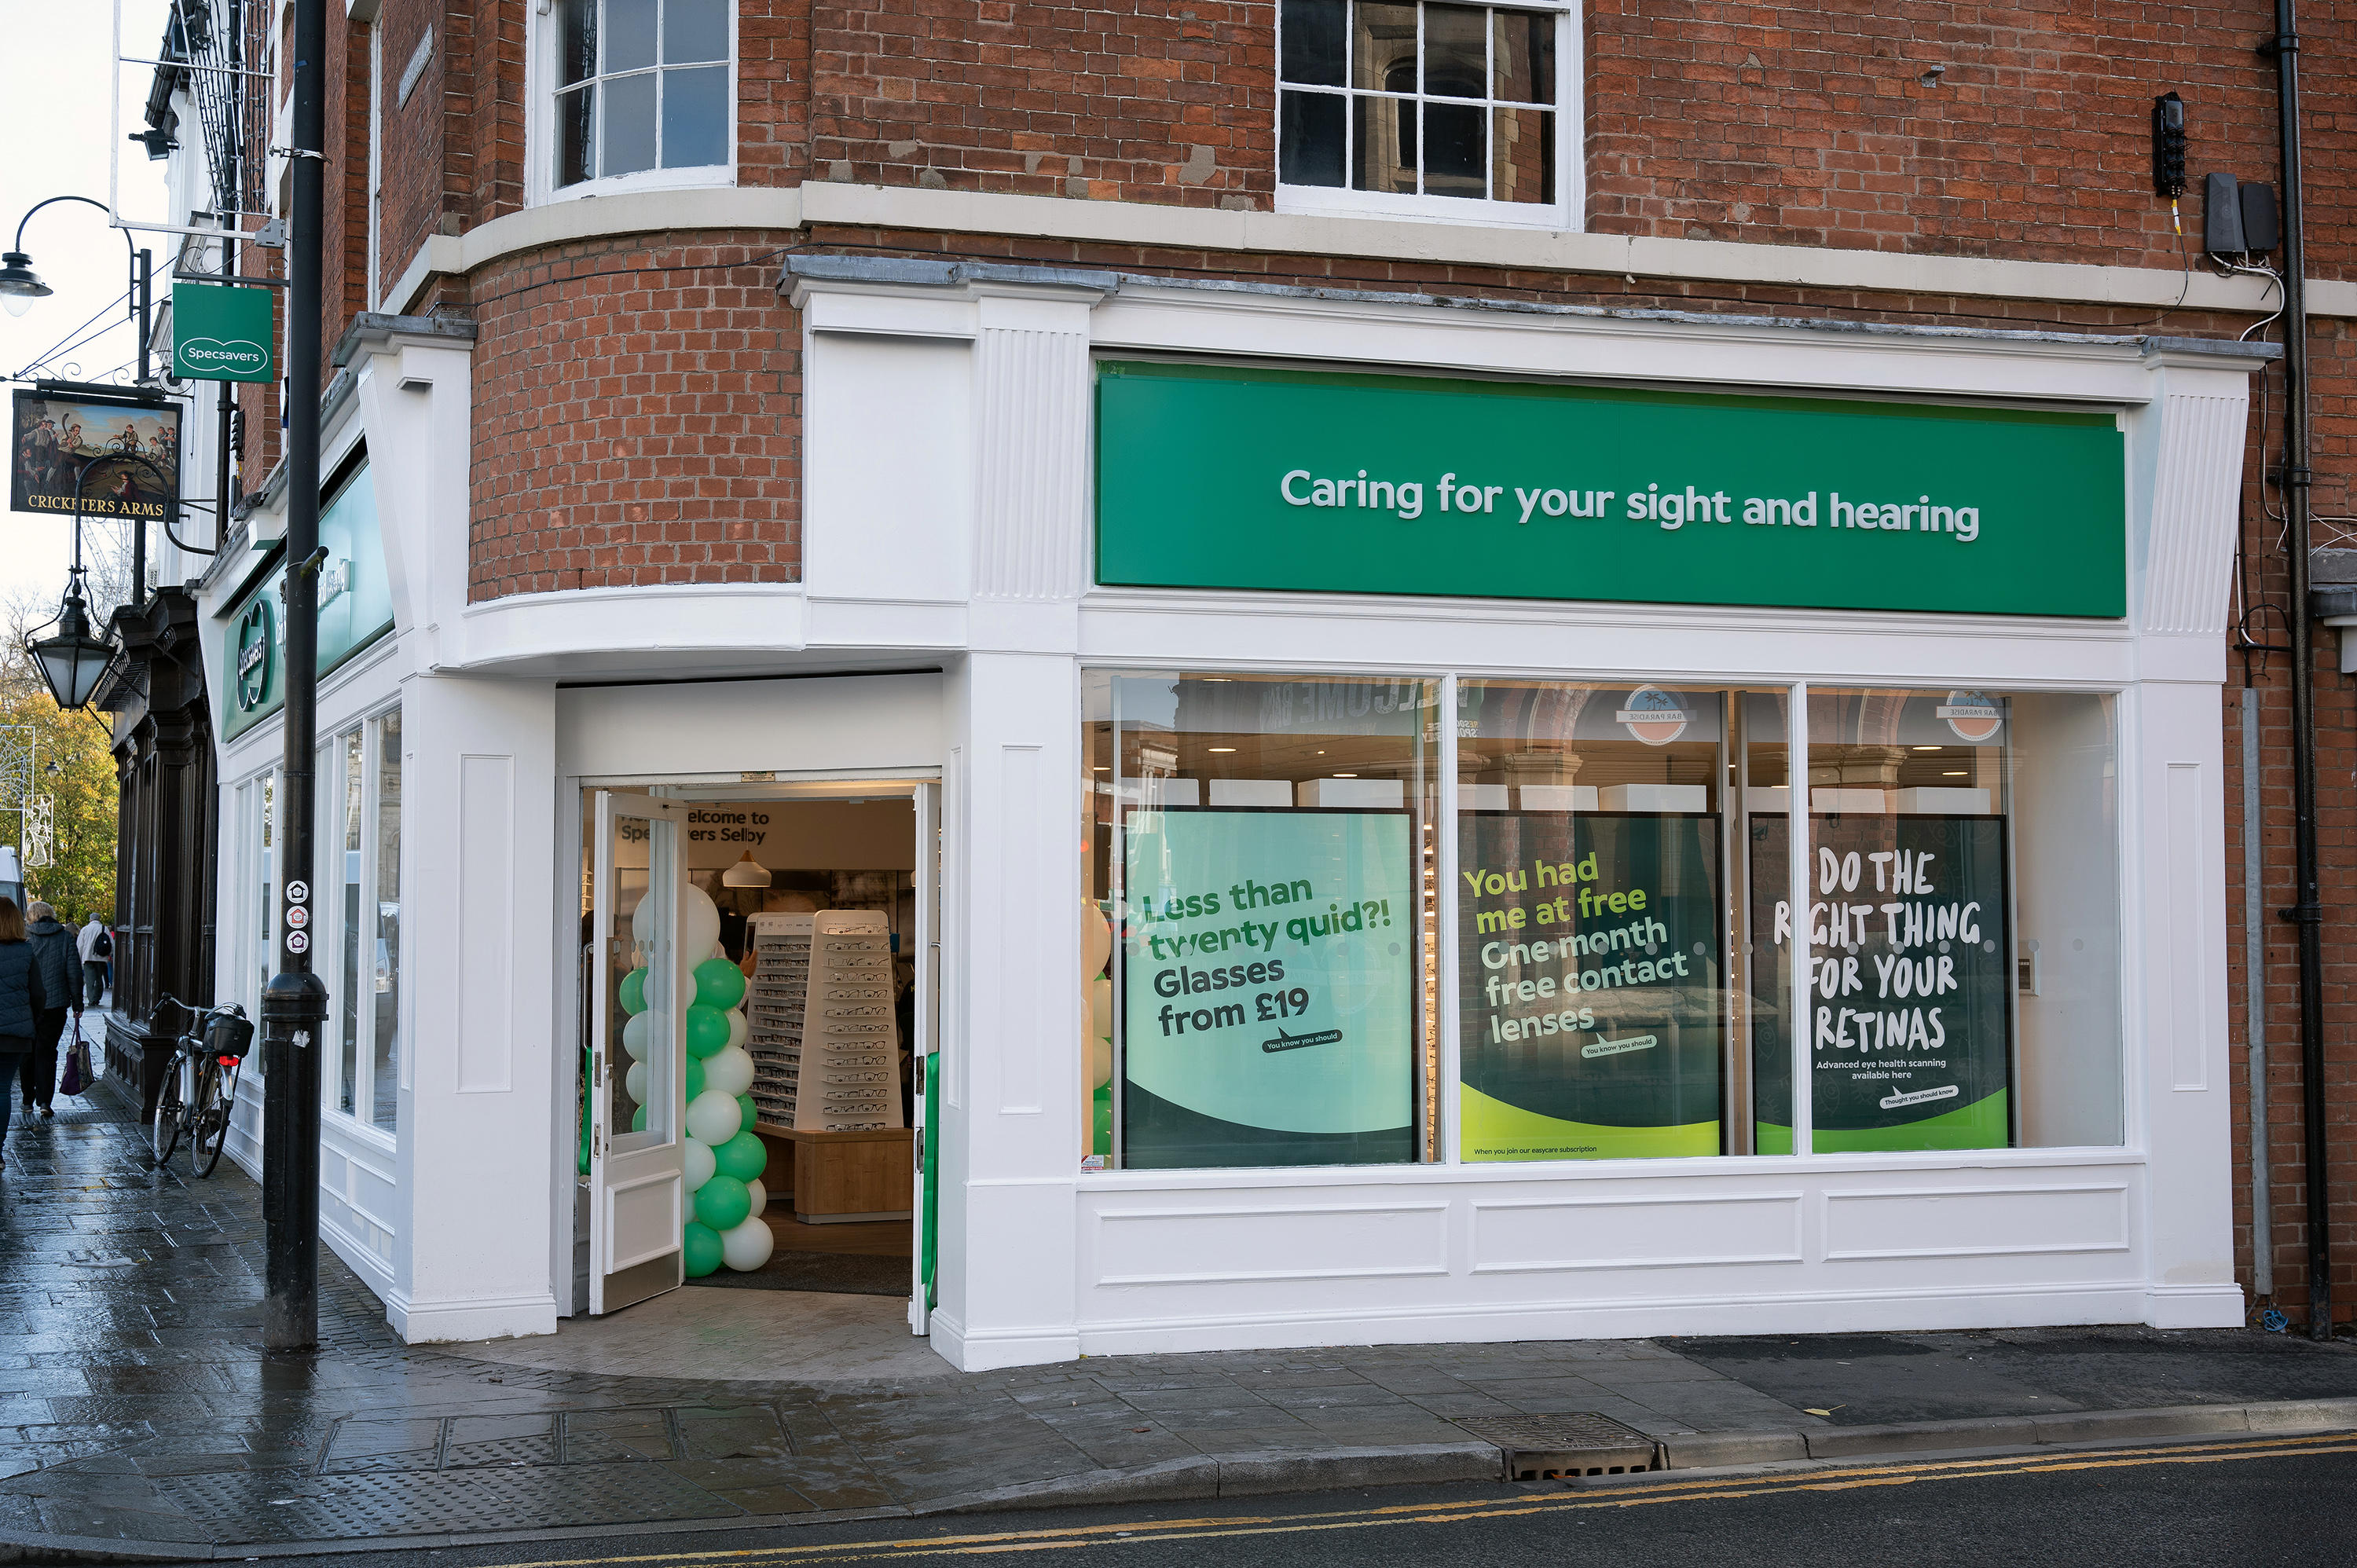 Images Specsavers Opticians and Audiologists - Selby